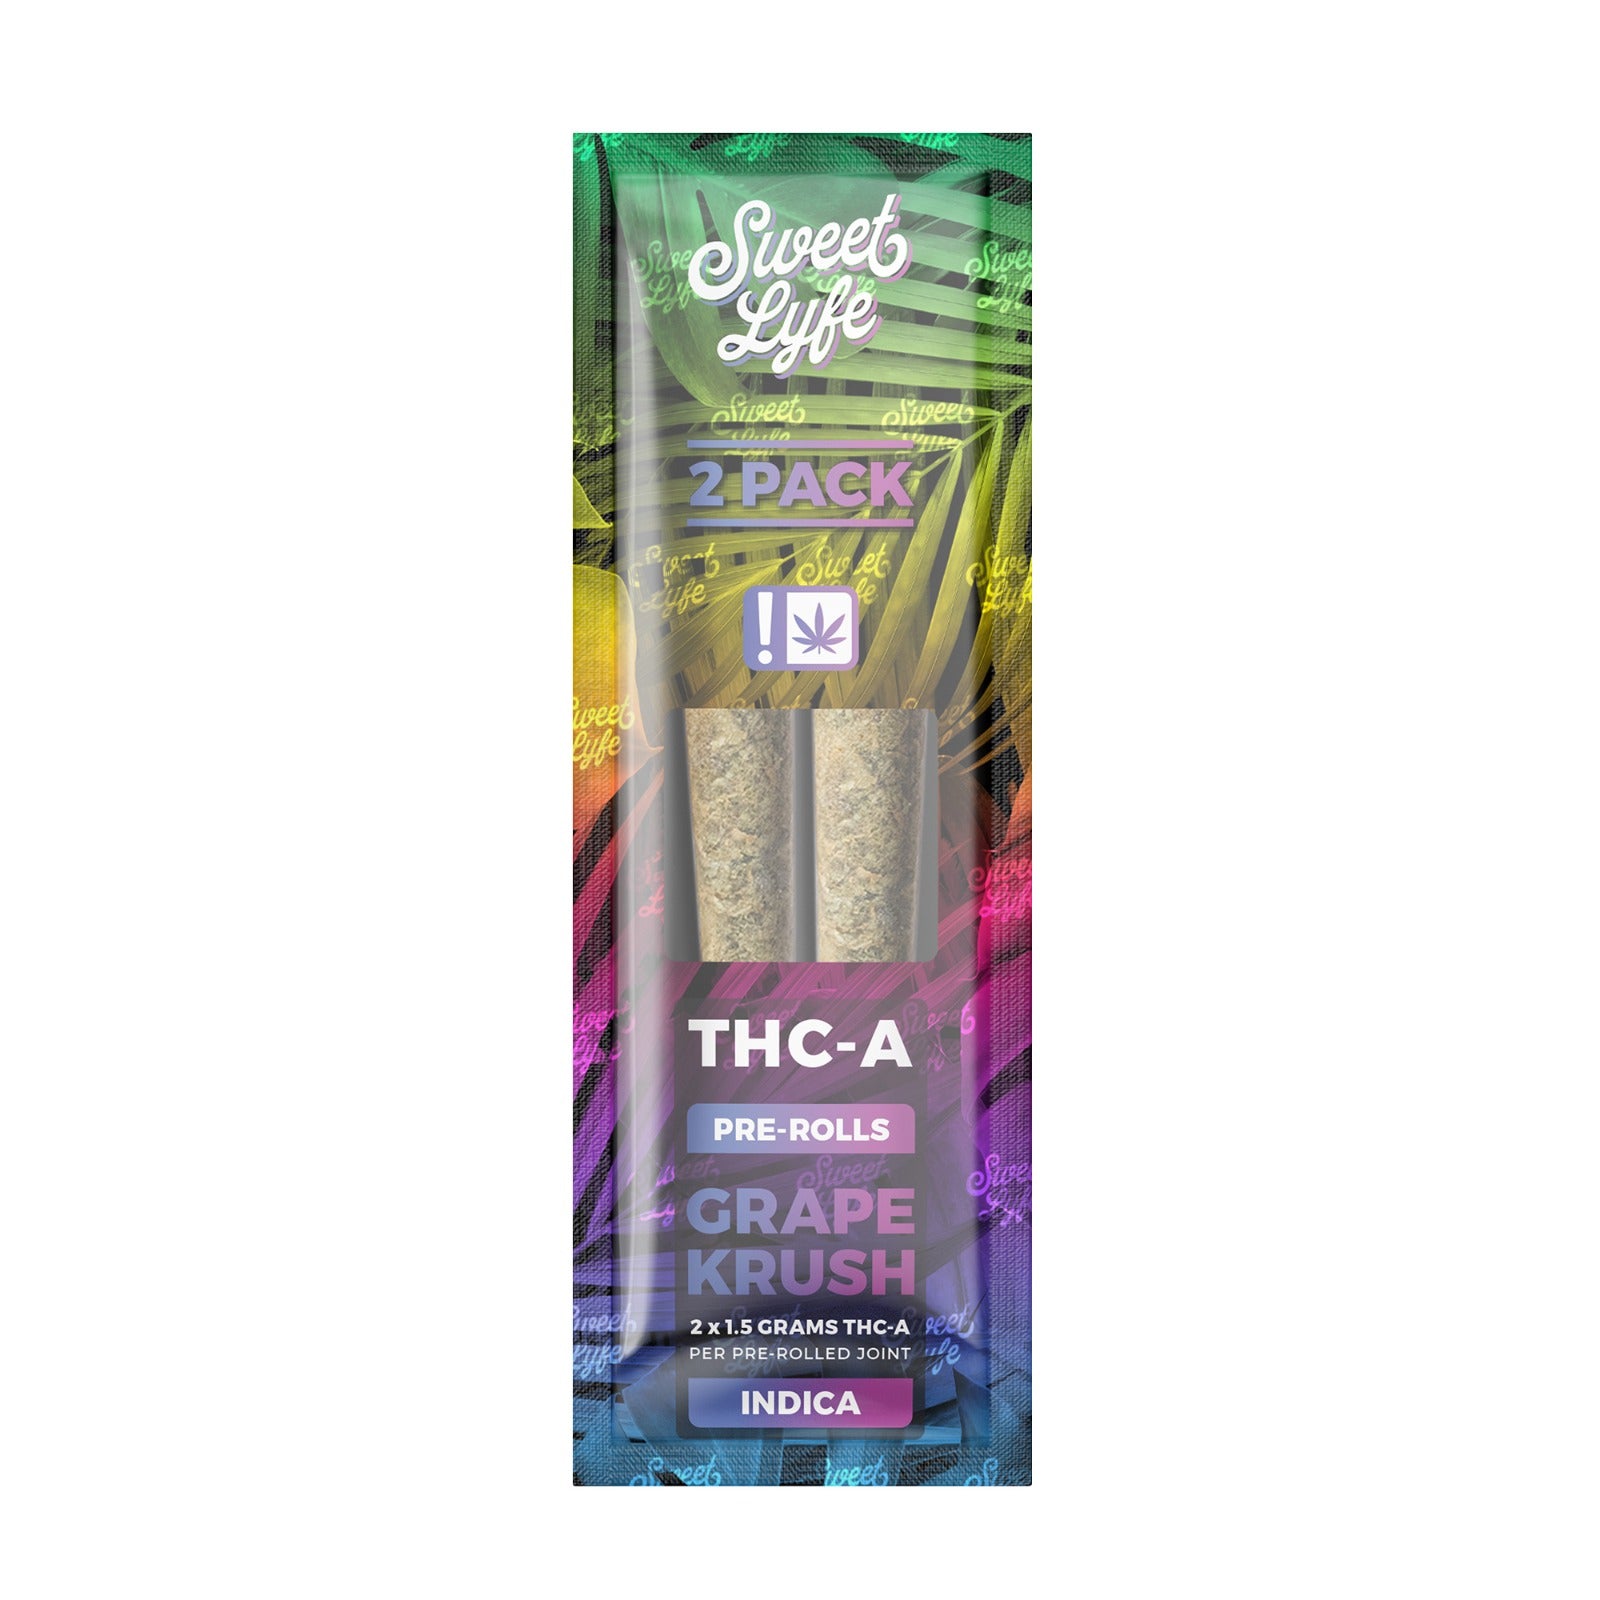 2 Pack Pre-Rolls Joint THC-A|Grape Krush - Indica